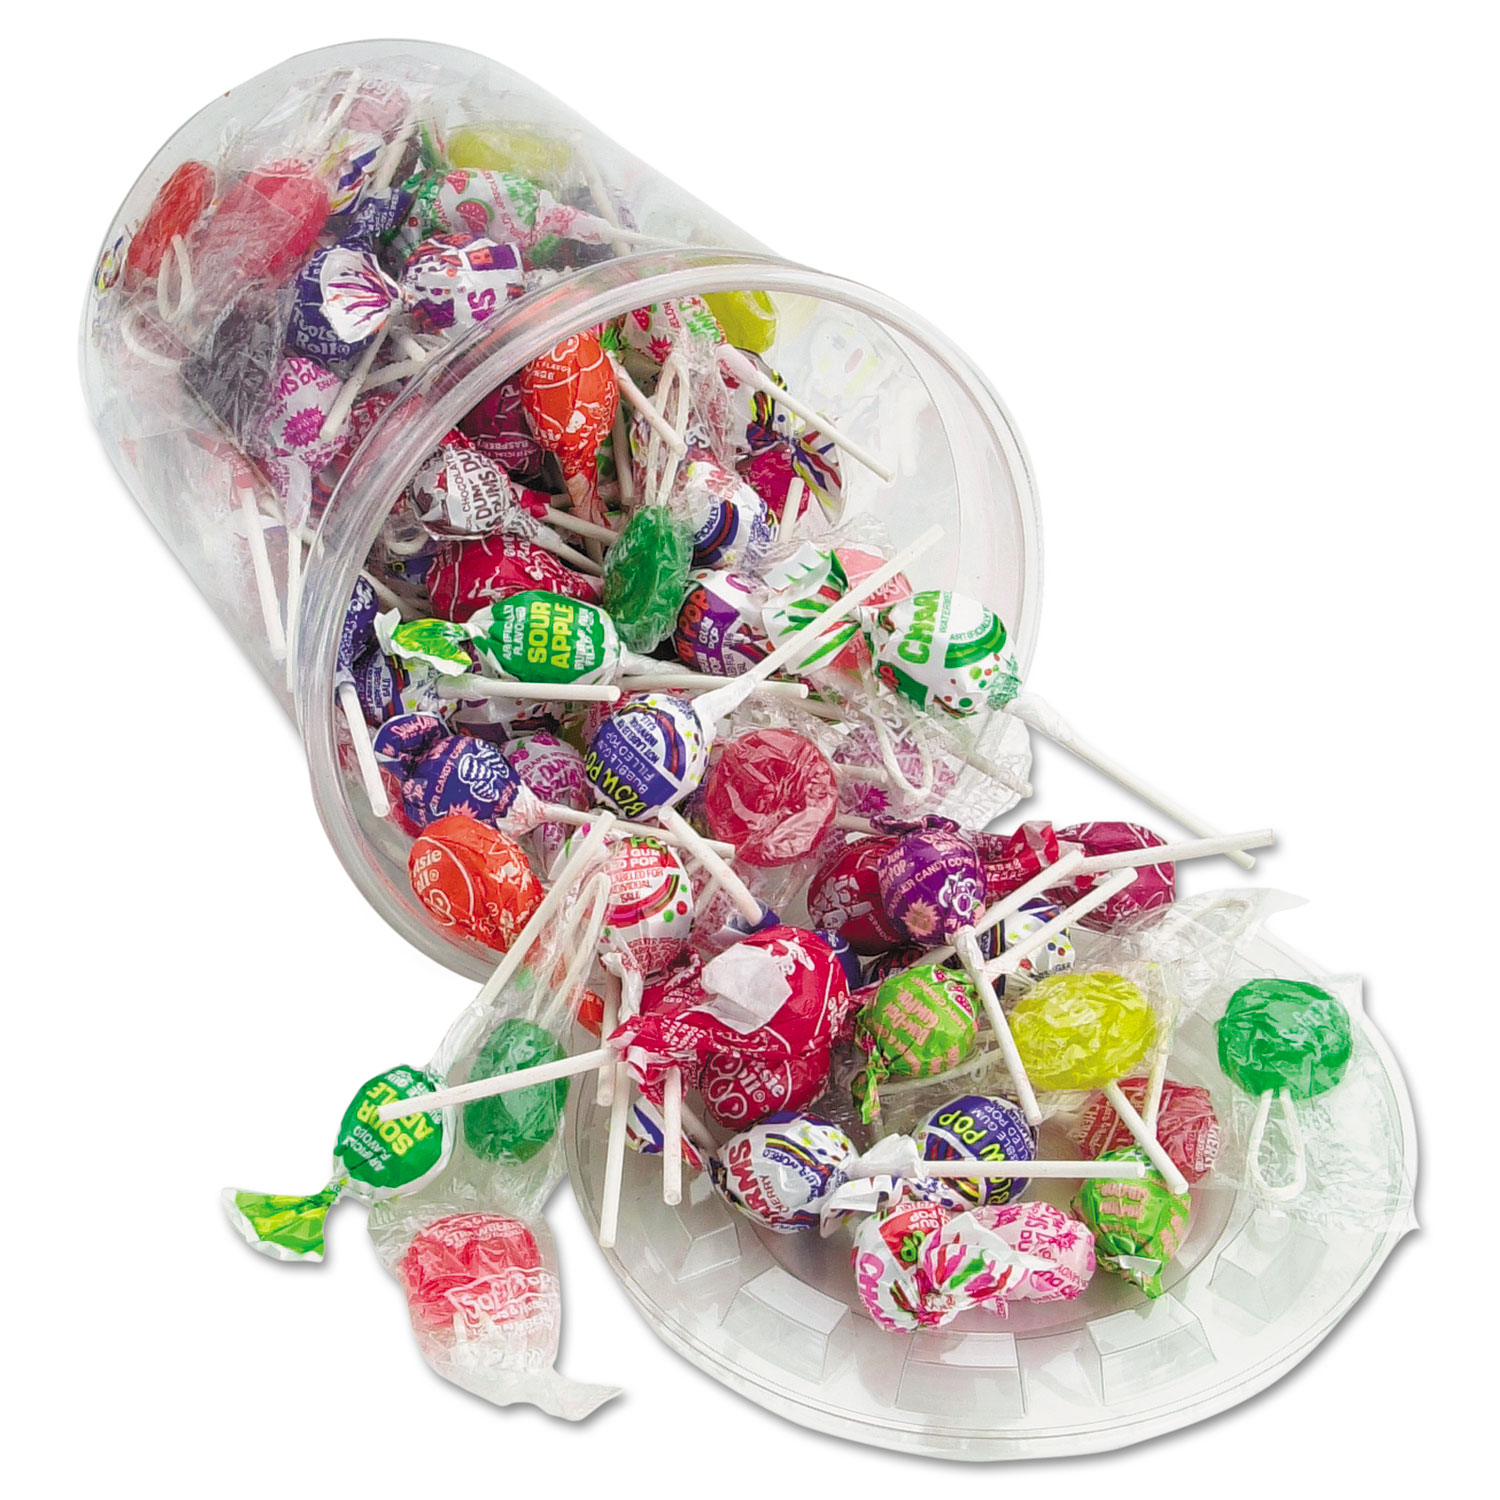  Office Snax 00017 Top o' the Line Pops, Candy, 3.5lb Tub (OFX00017) 